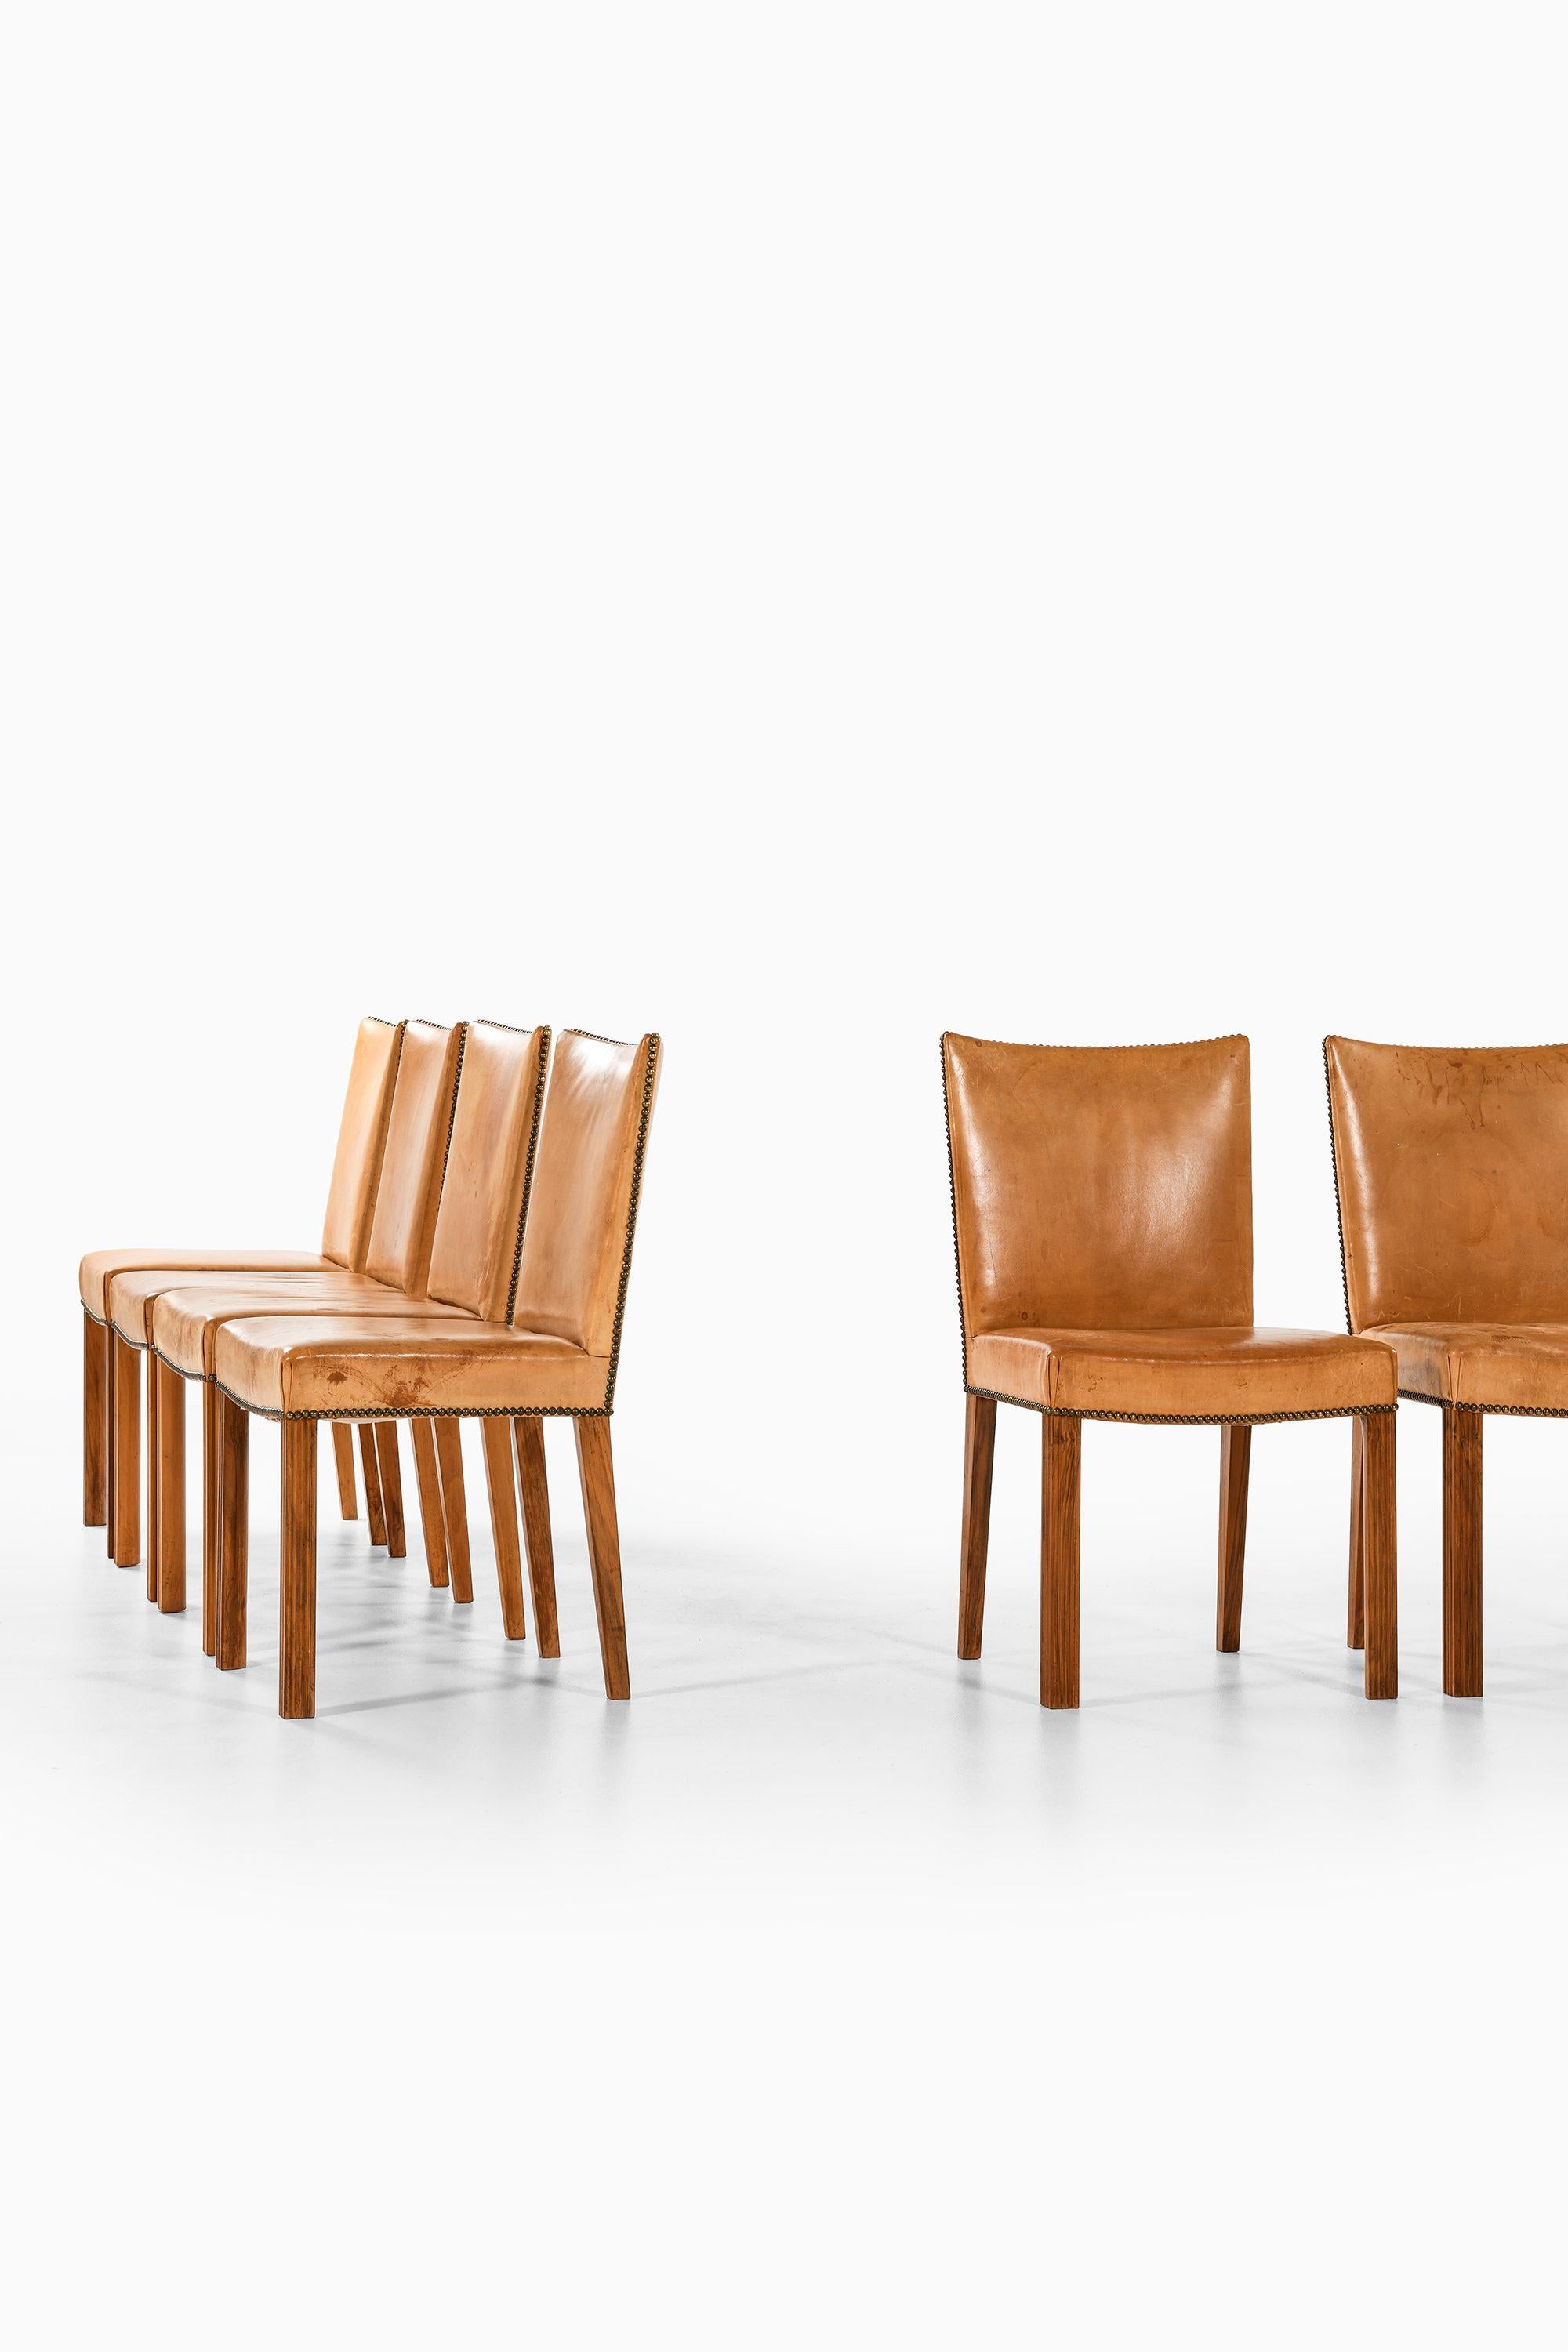 Scandinavian Modern Set of 8 Dining Chairs in Walnut and Brass, 1940s For Sale